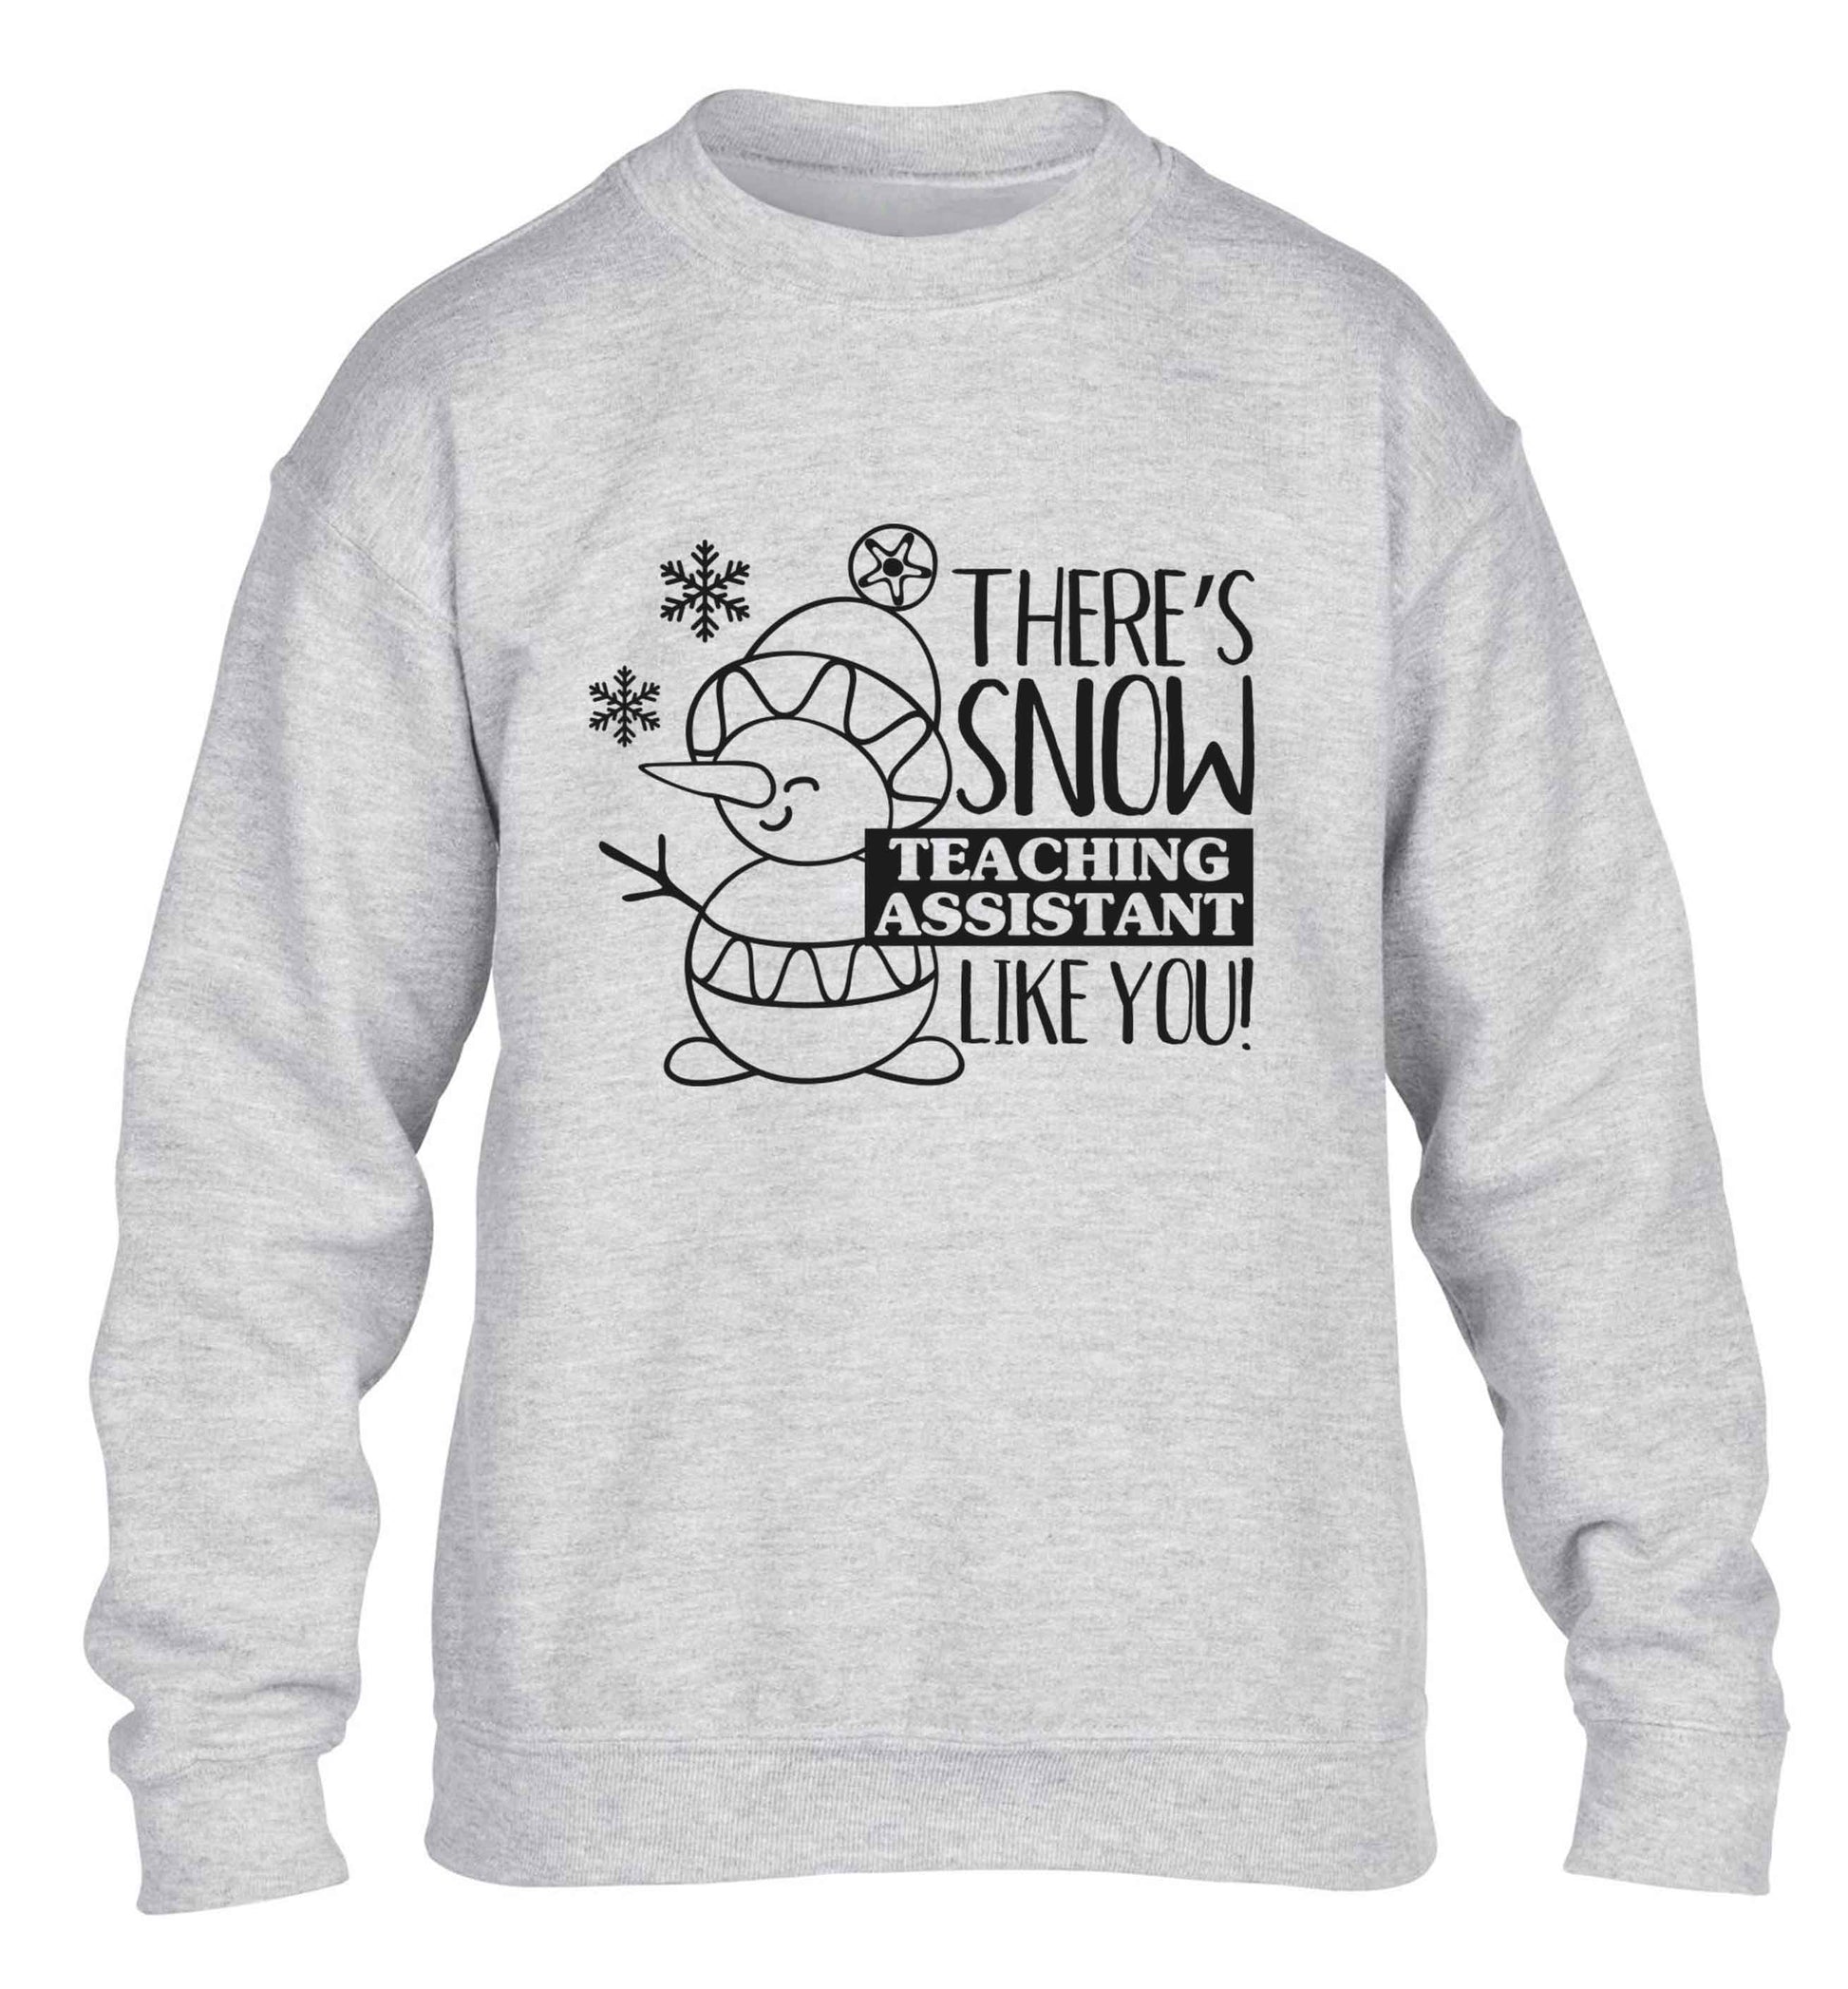 There's snow teaching assistant like you children's grey sweater 12-13 Years